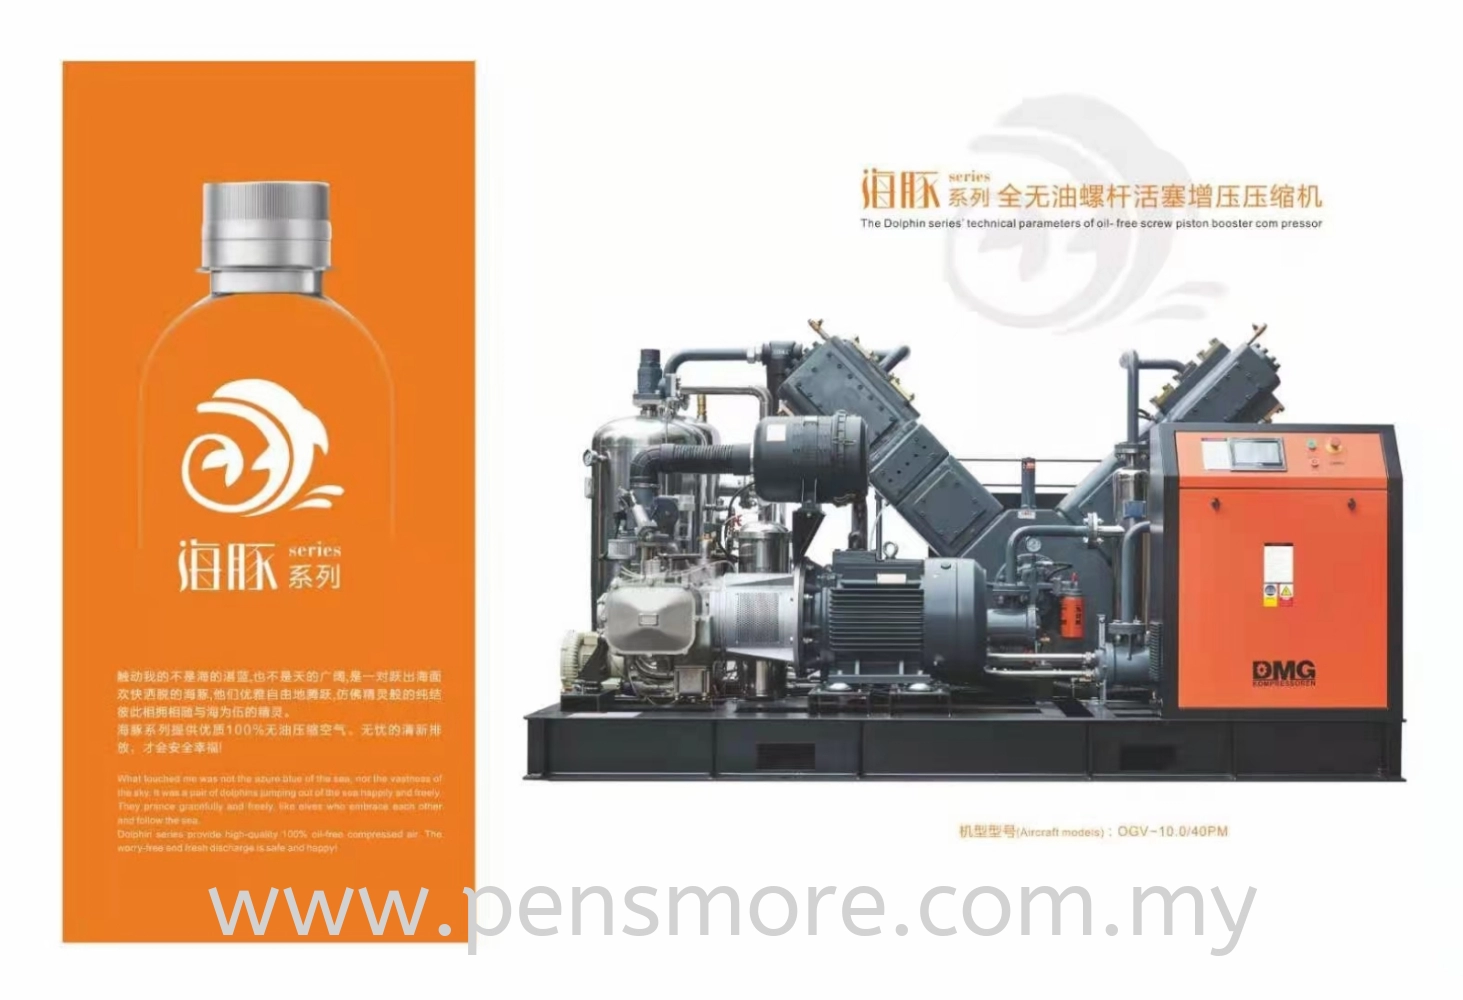 DMG - LGV2-6.0/40PM Eagle Series four-steps compressed technical parameters of oil-free Screw piston booster Compressor